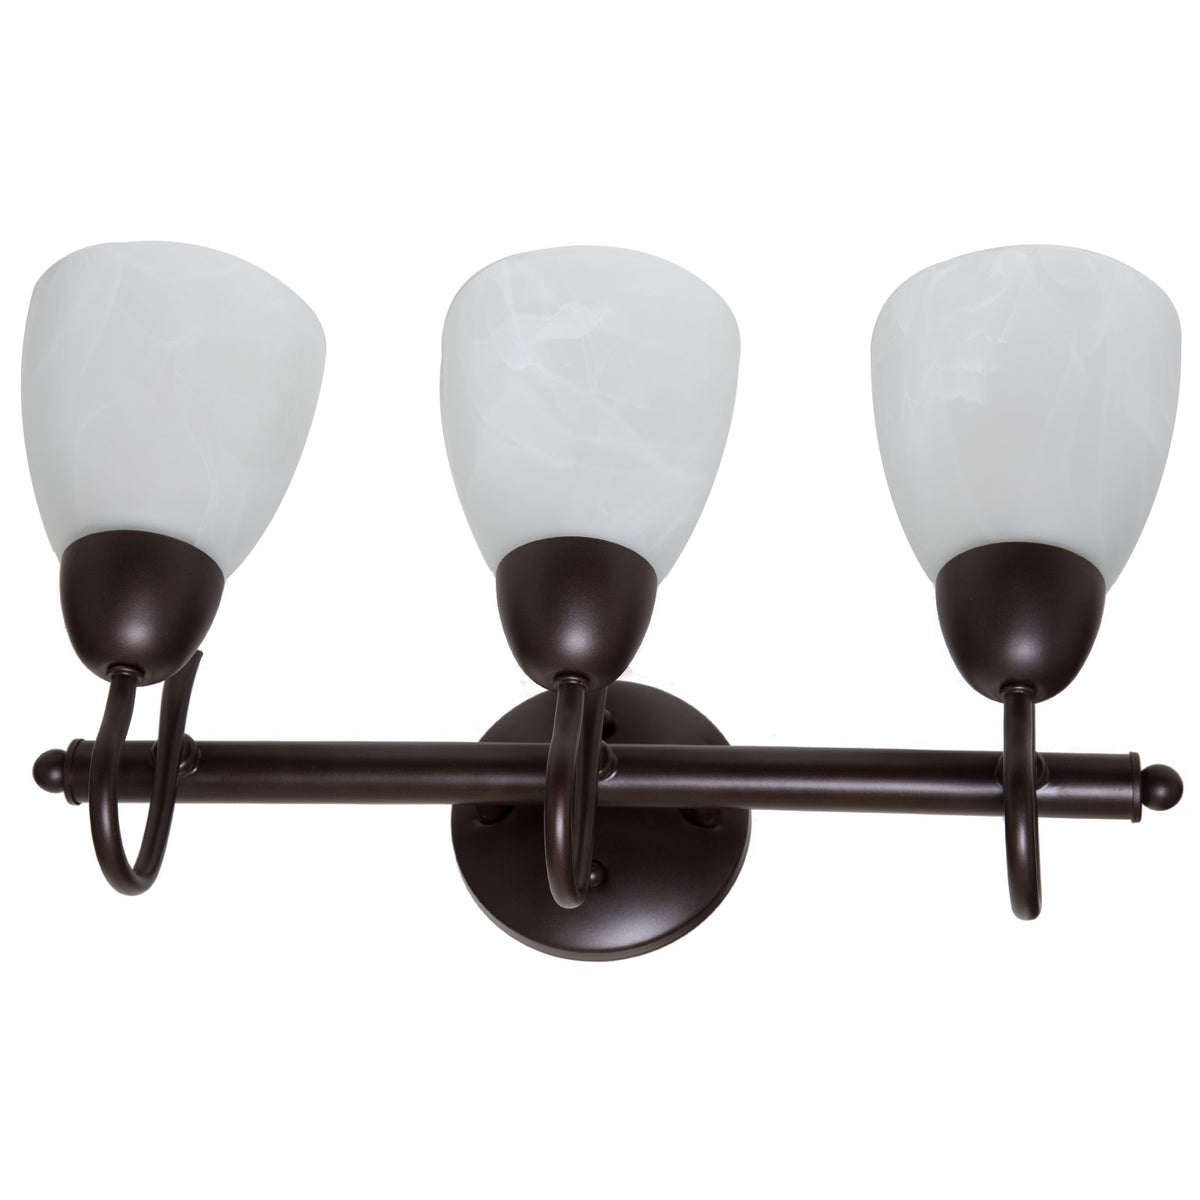 buy bathroom light fixtures at cheap rate in bulk. wholesale & retail commercial lighting goods store. home décor ideas, maintenance, repair replacement parts